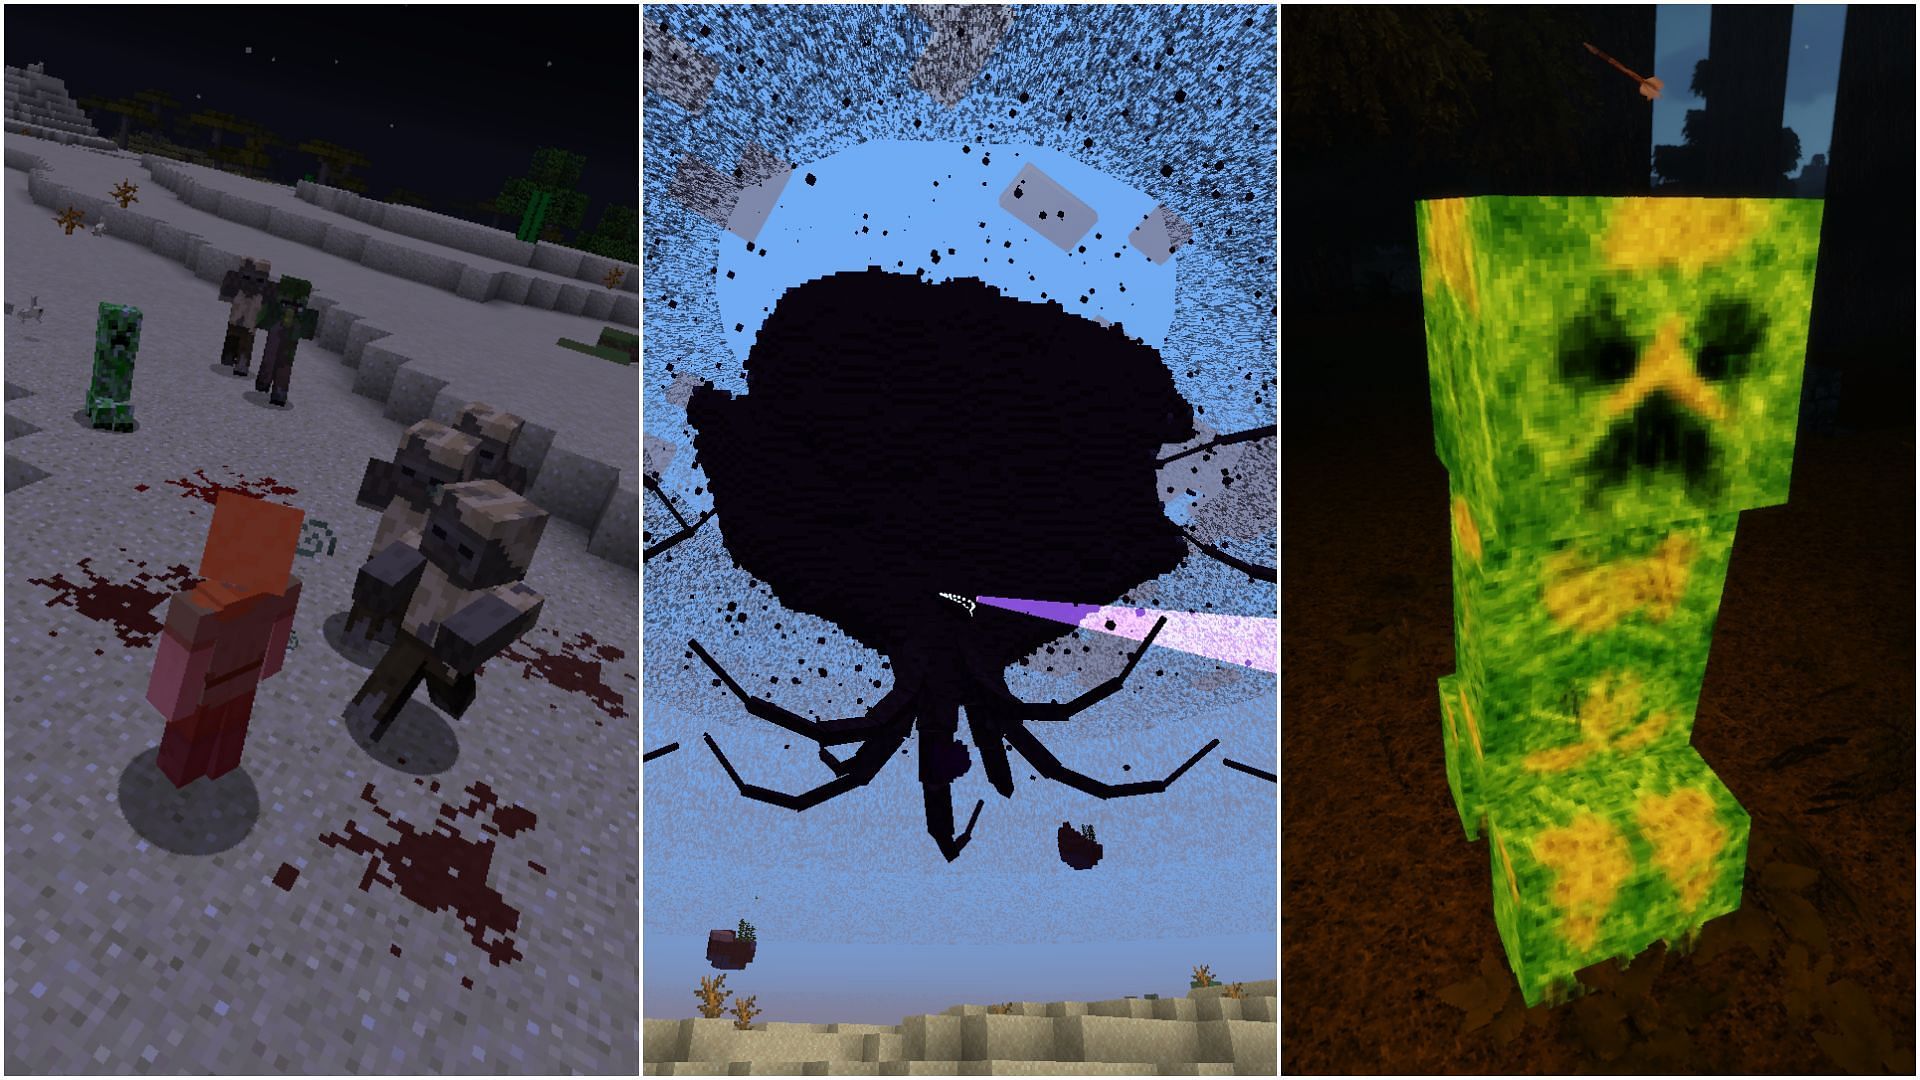 There are many dangerous Minecraft mods that increase the game